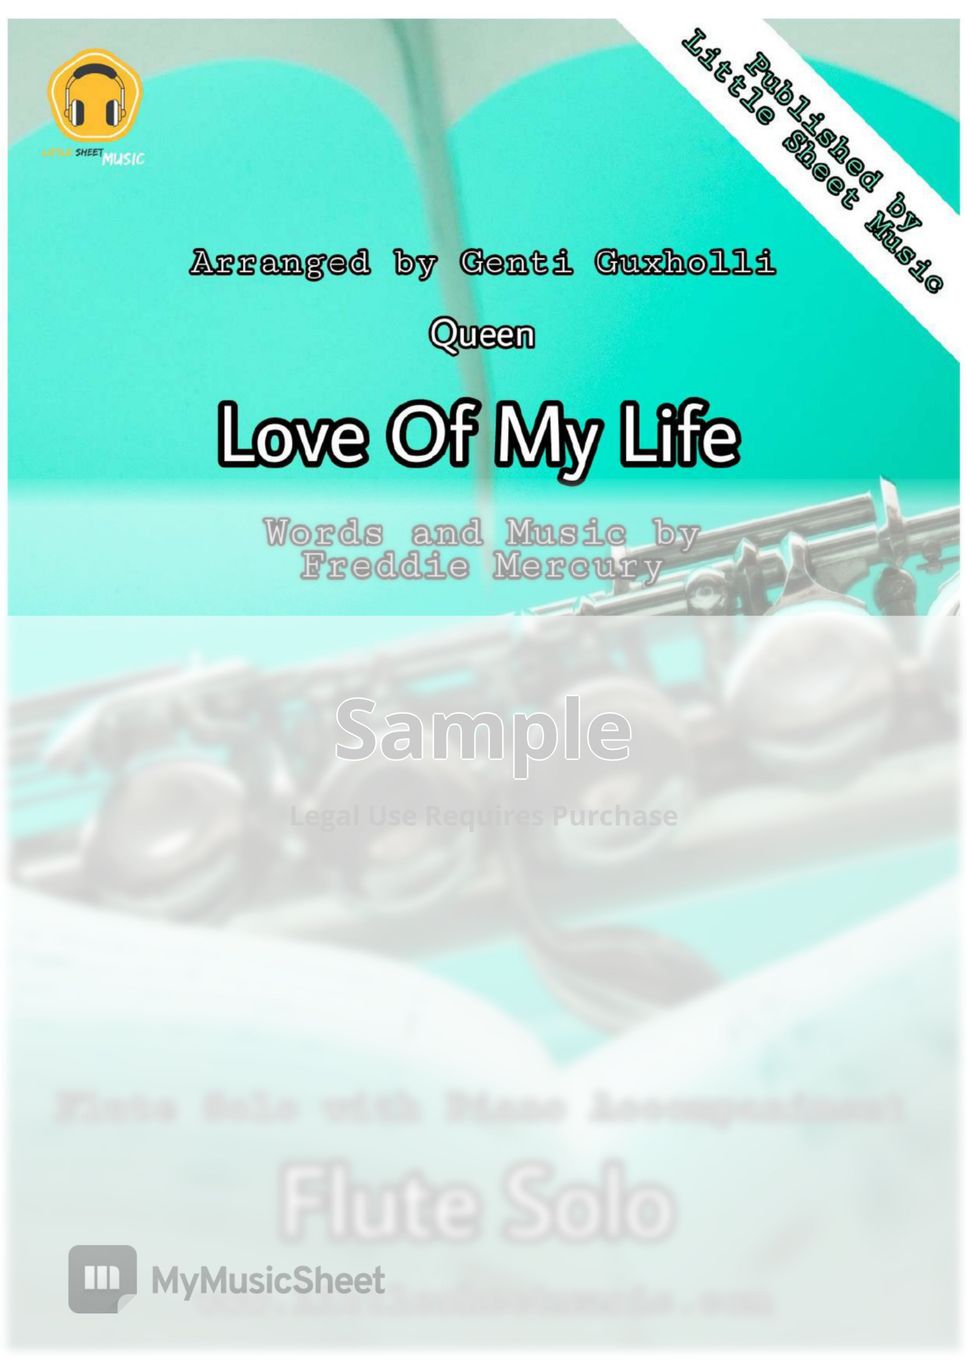 Queen - Love Of My Life (Flute Solo with Piano Accompaniment) by Genti Guxholli